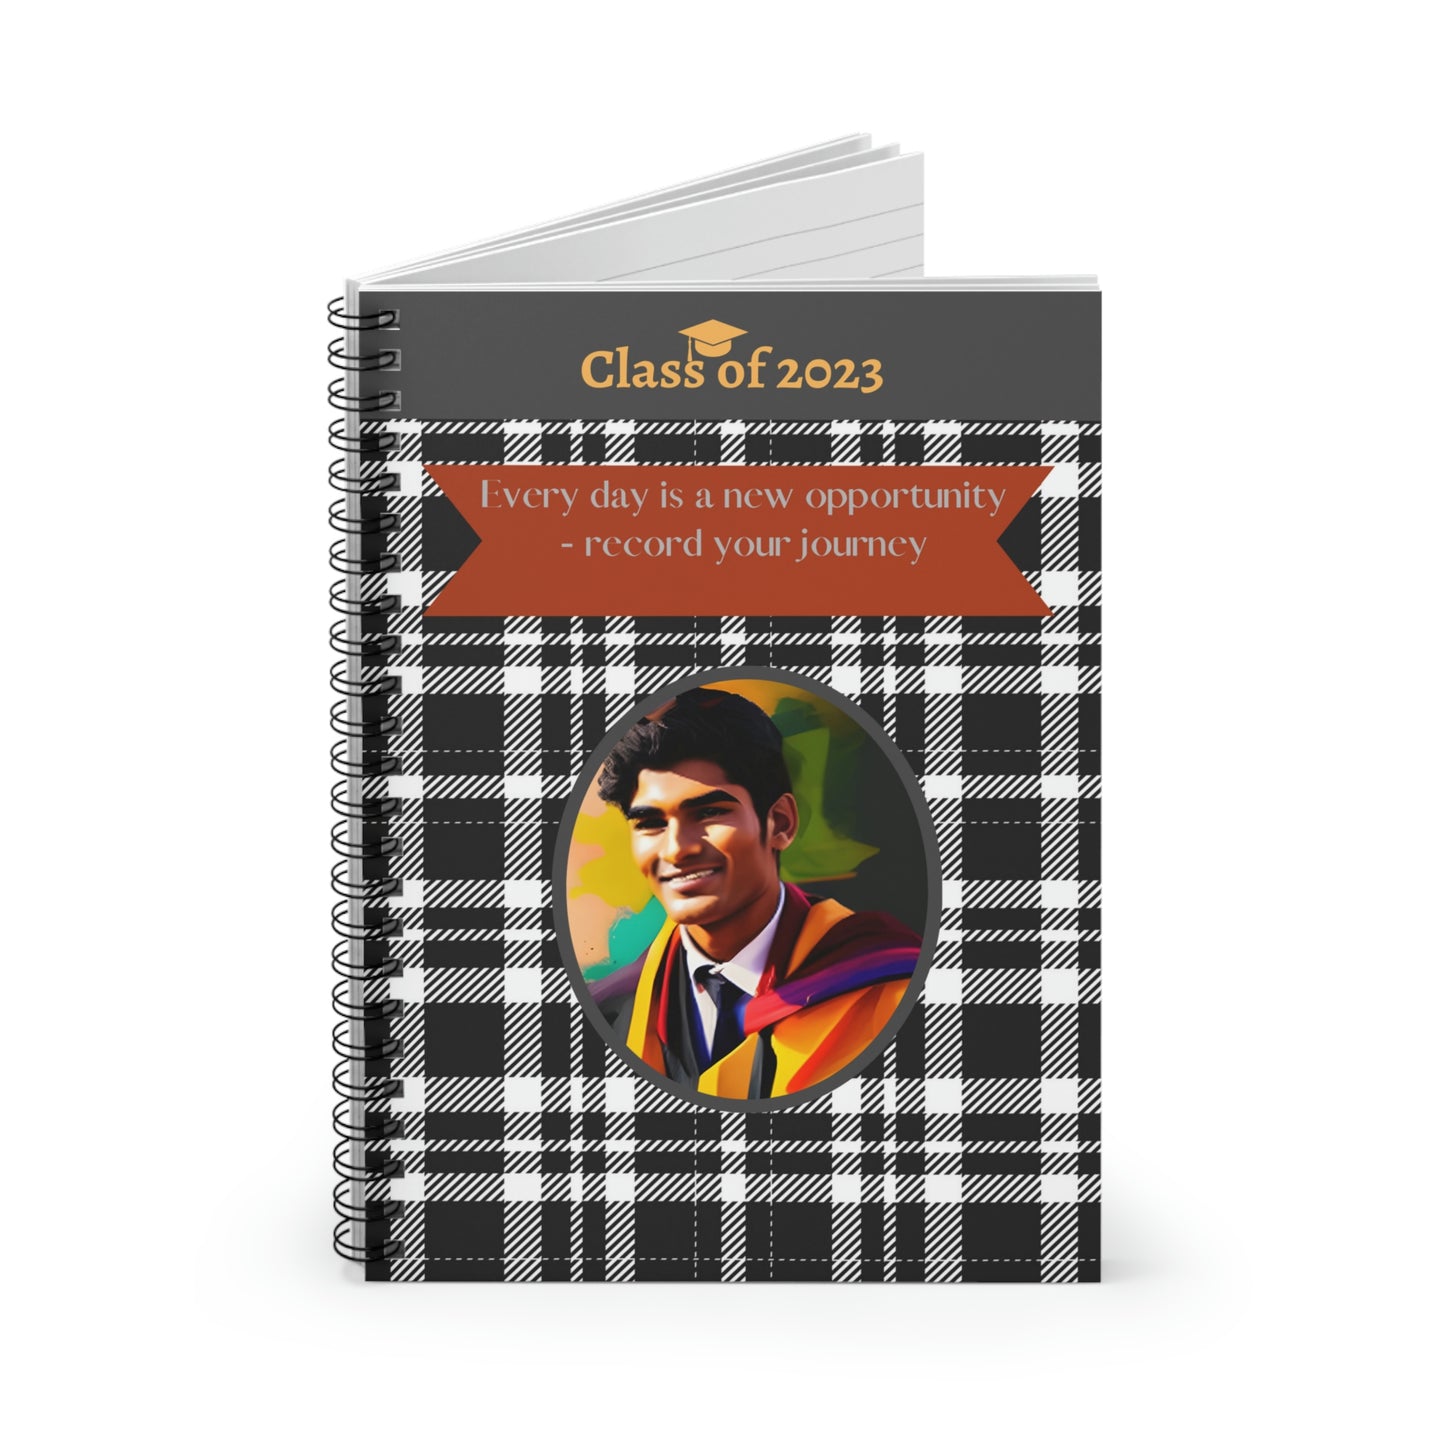 Class of 2023 Graduate Journal - (Indian Young Man 2) - Ruled Line